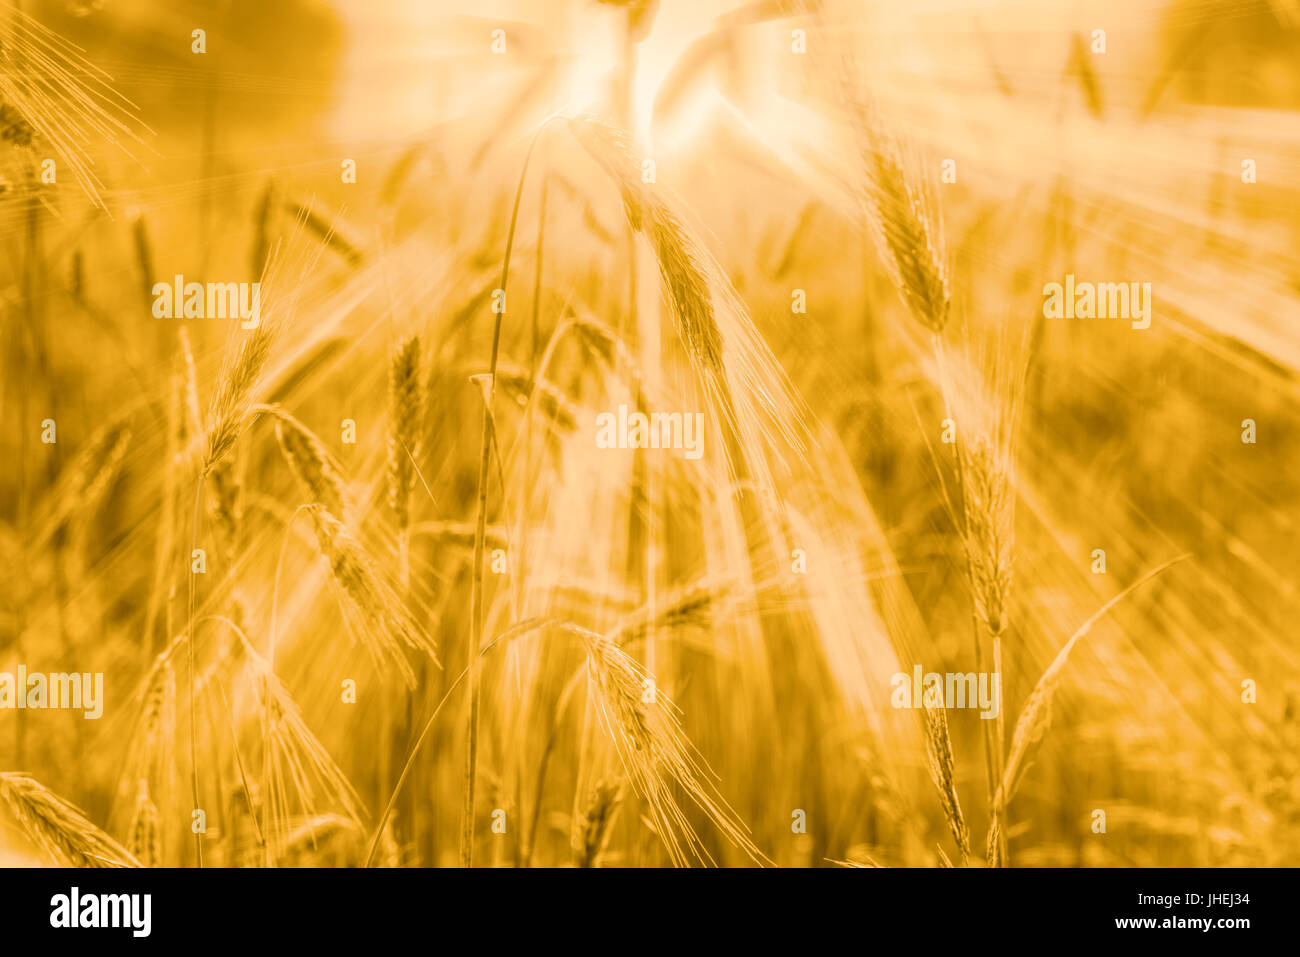 A field of wheat in the sun with a defocused background. Selective focus of the rye ears, nature background with copy space. Cereal plants in the sun. Stock Photo